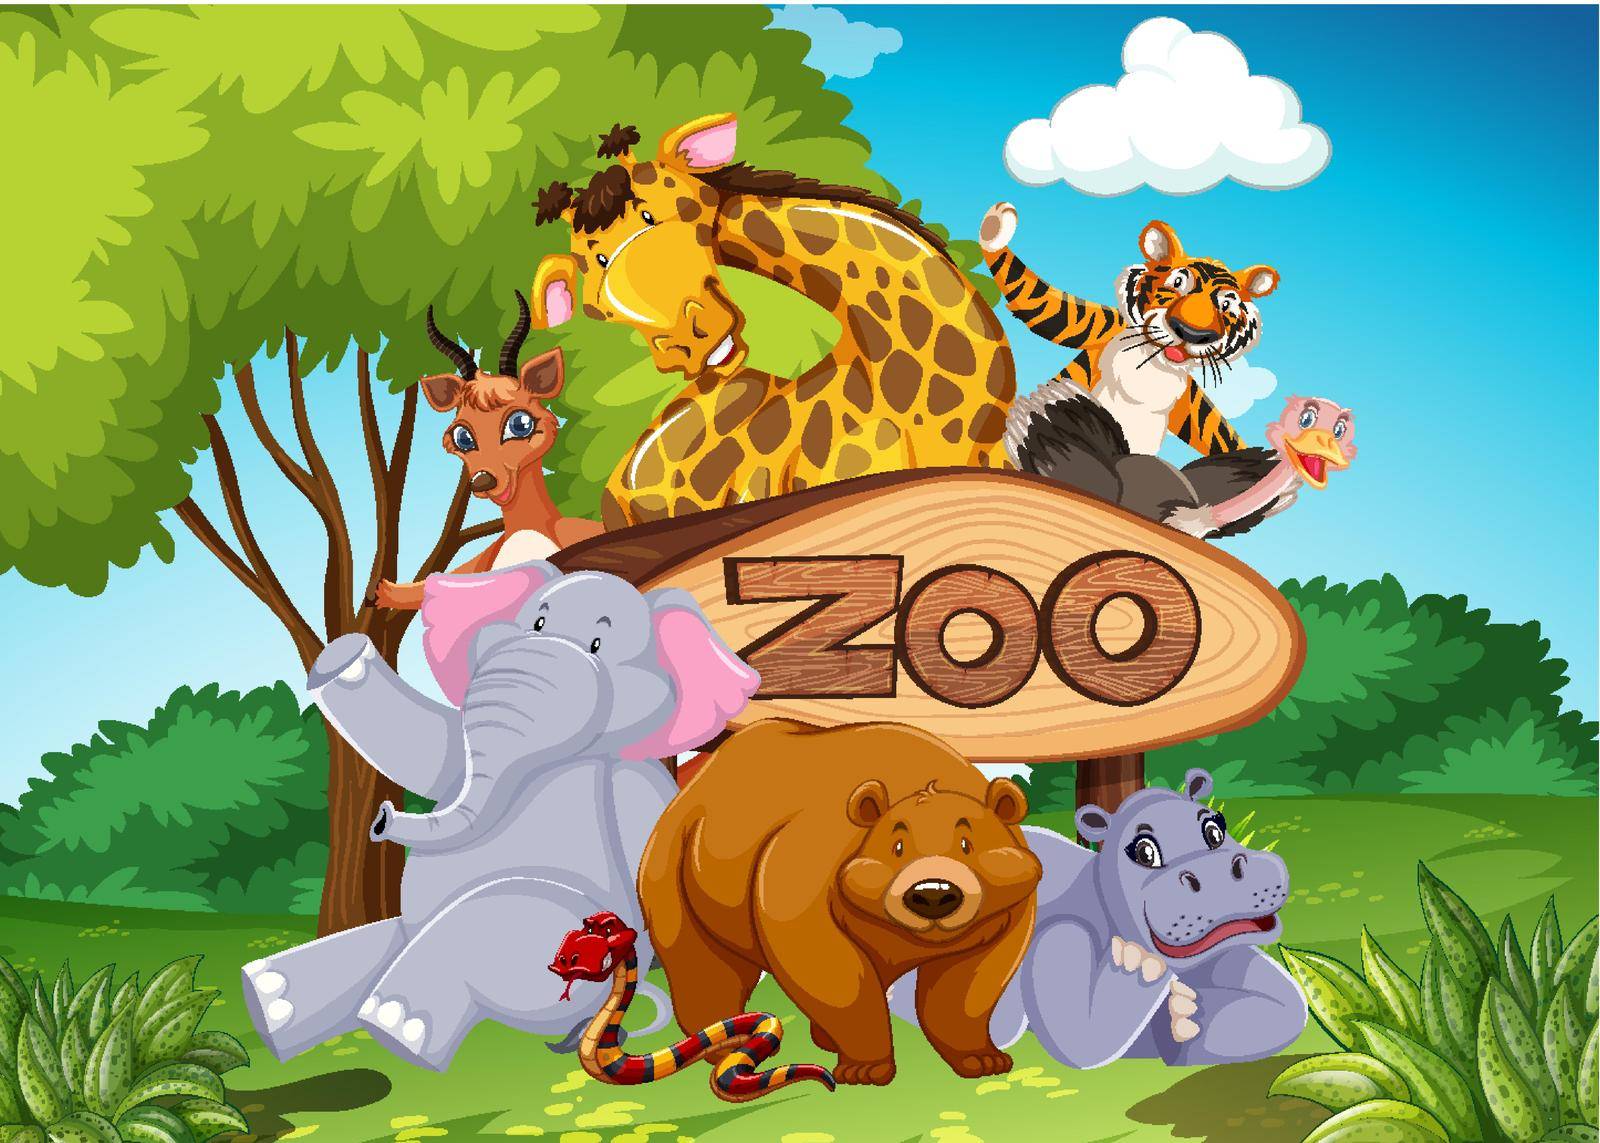 Zoo animals in the wild nature background by iimages